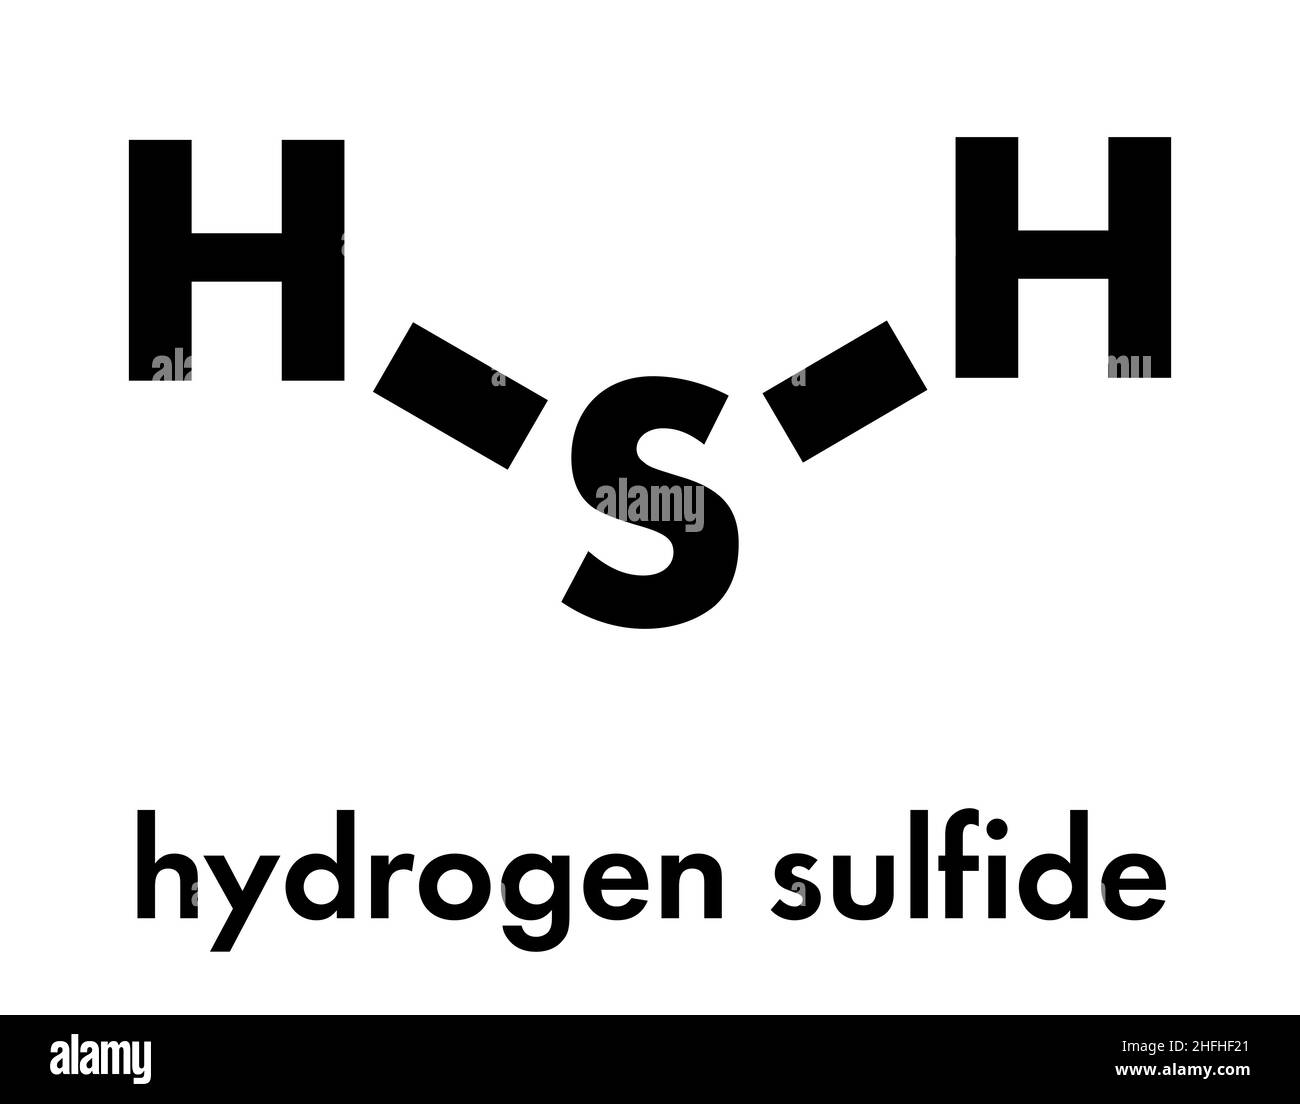 Hydrogen sulfide (H2S) molecule. Toxic gas with characteristic odor of rotten eggs. Skeletal formula. Stock Vector